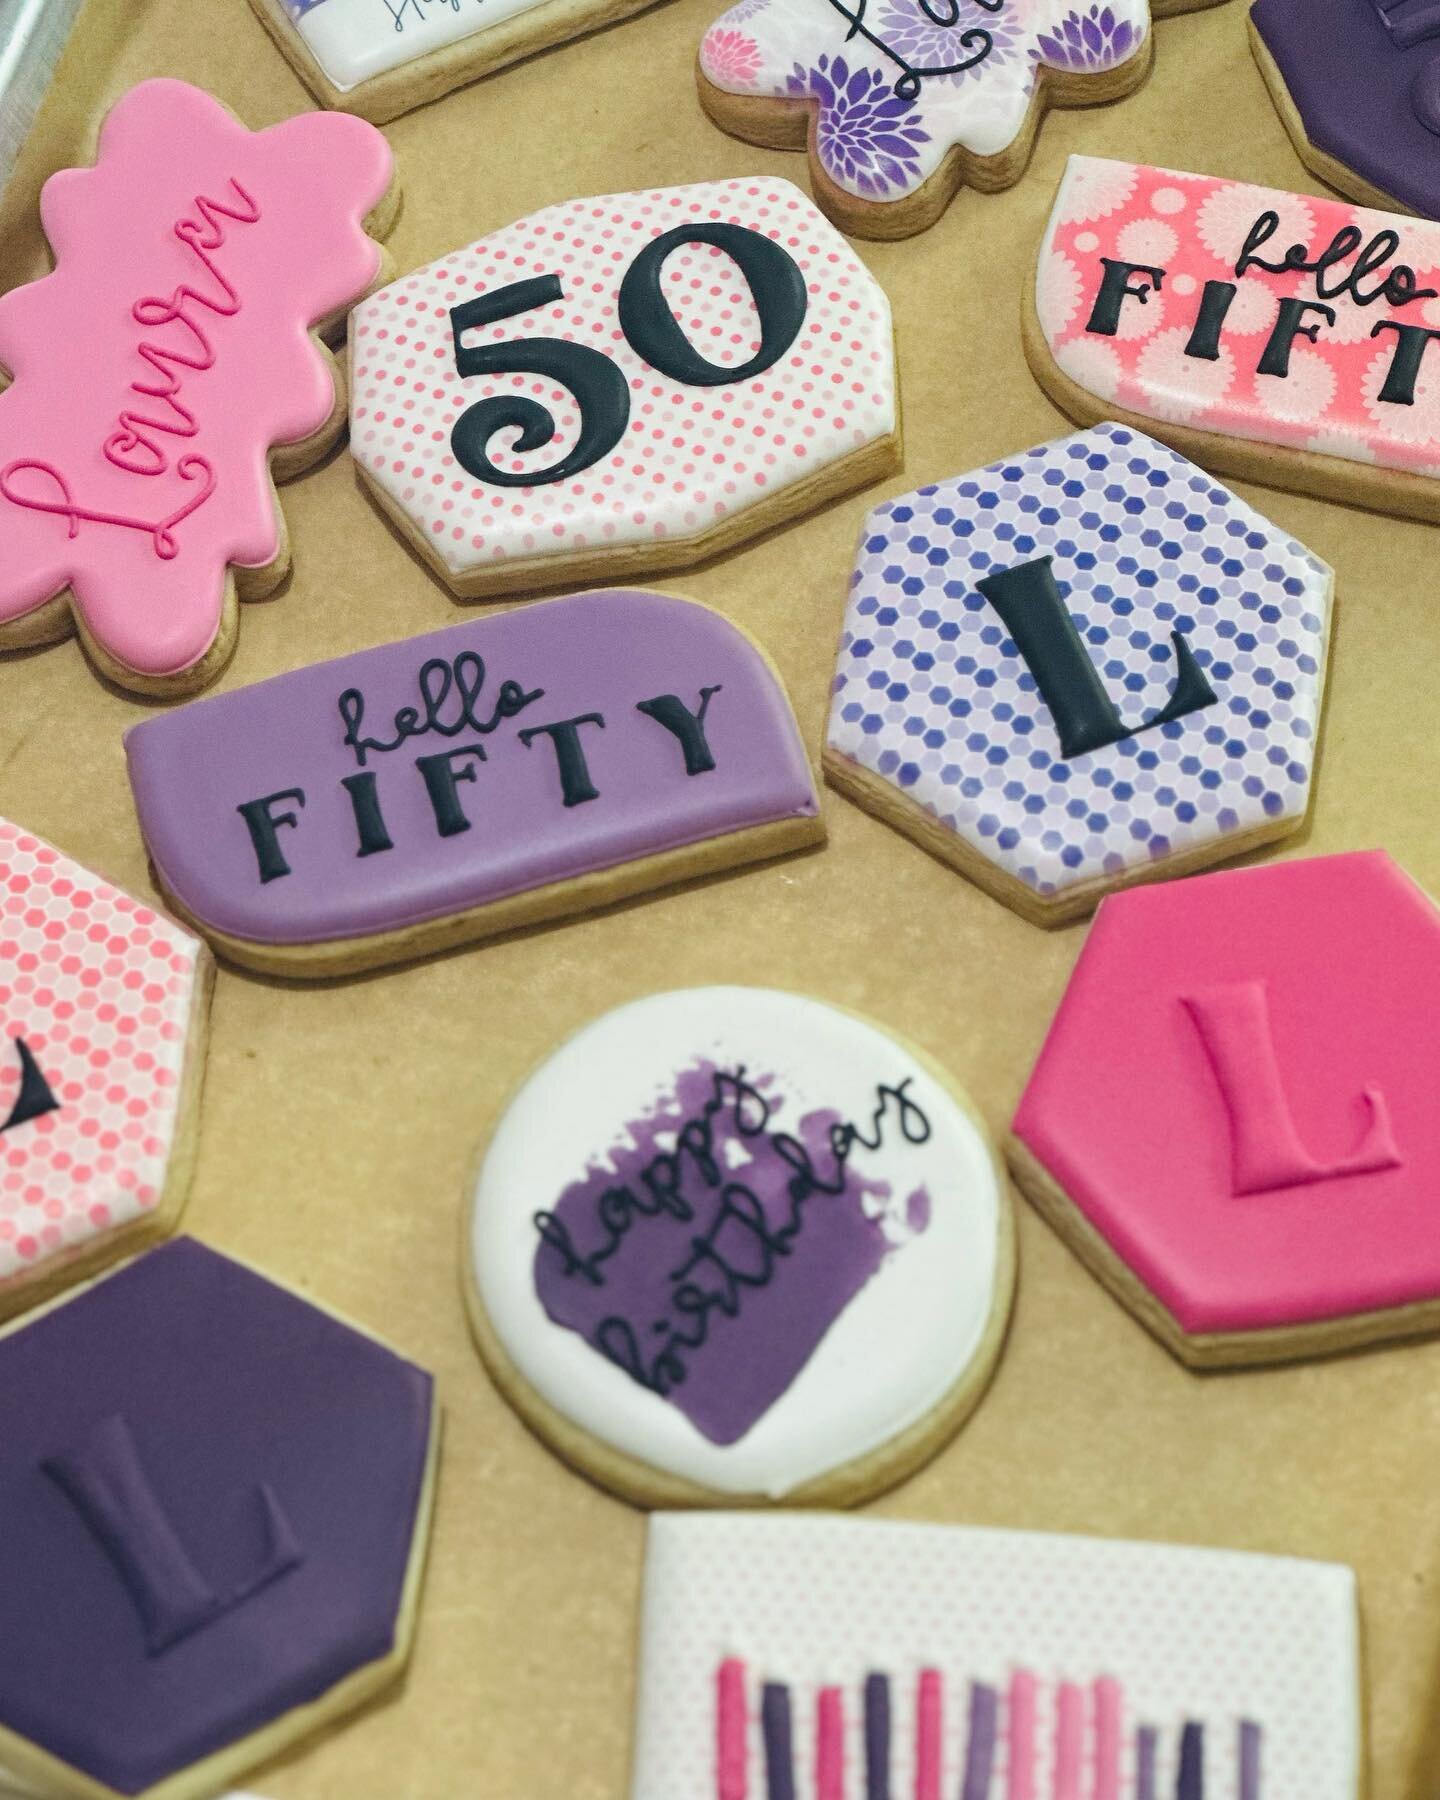 Happy 50th birthday to Laura!! The client asked for pink, purple and black inspired birthday for her sister. I had fun playing with digital papers to make some of the backgrounds on these cookies. #SugarCookies #Homemade #RoyalIcing #CustomCookies #H